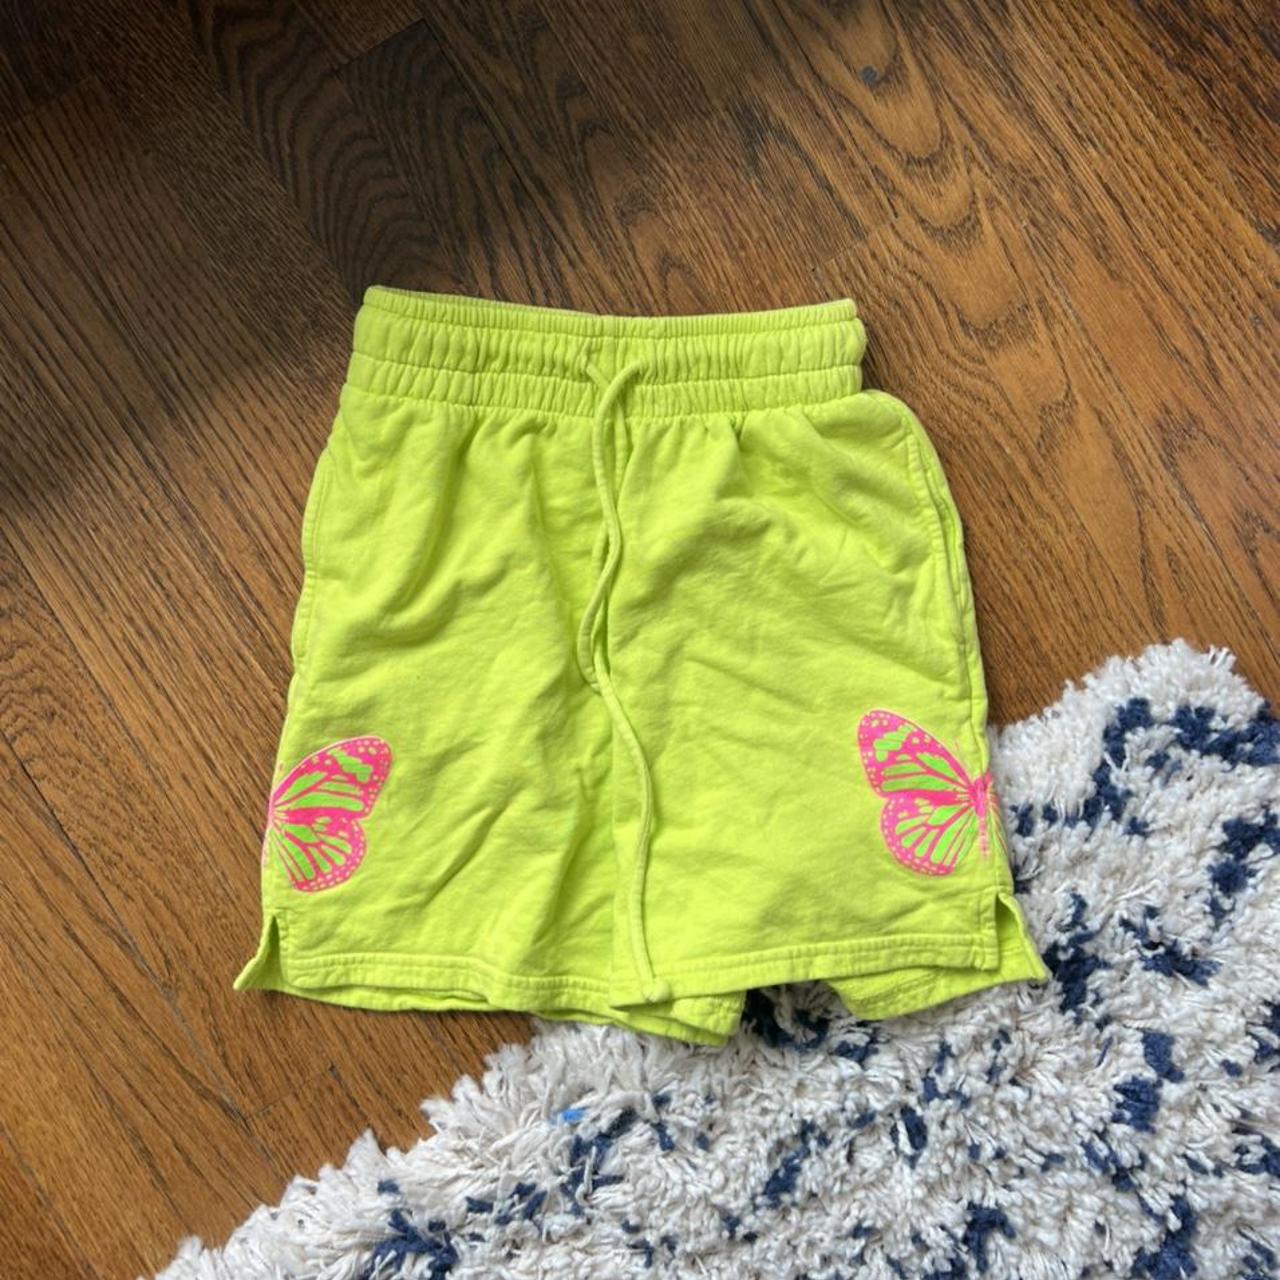 Triangl Women's Green and Pink Shorts | Depop